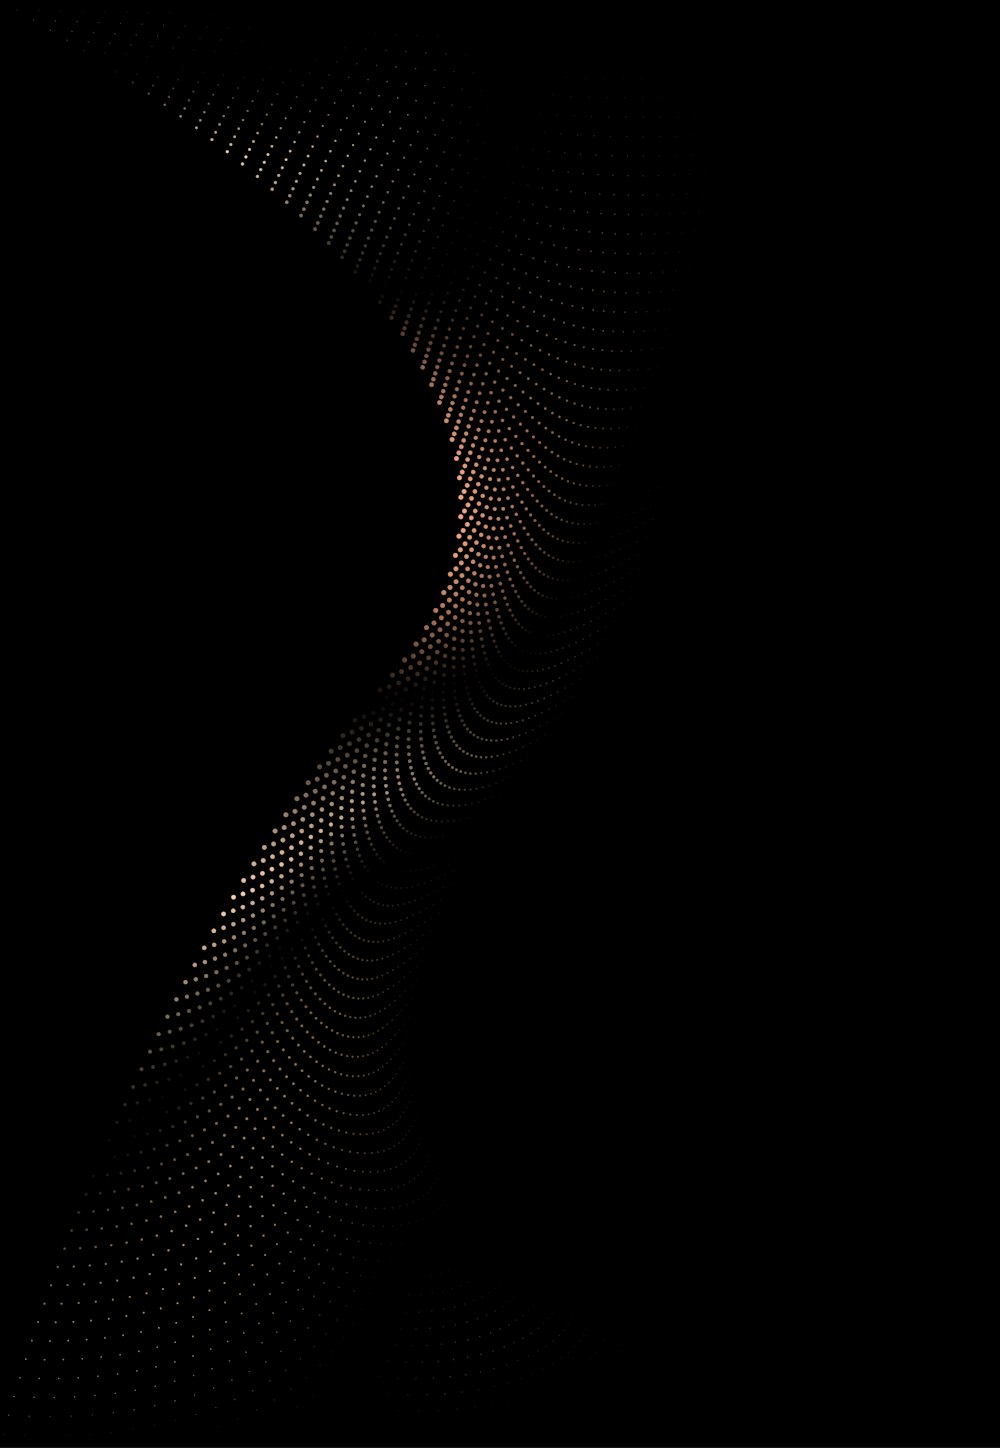 a black background with a pattern of dots